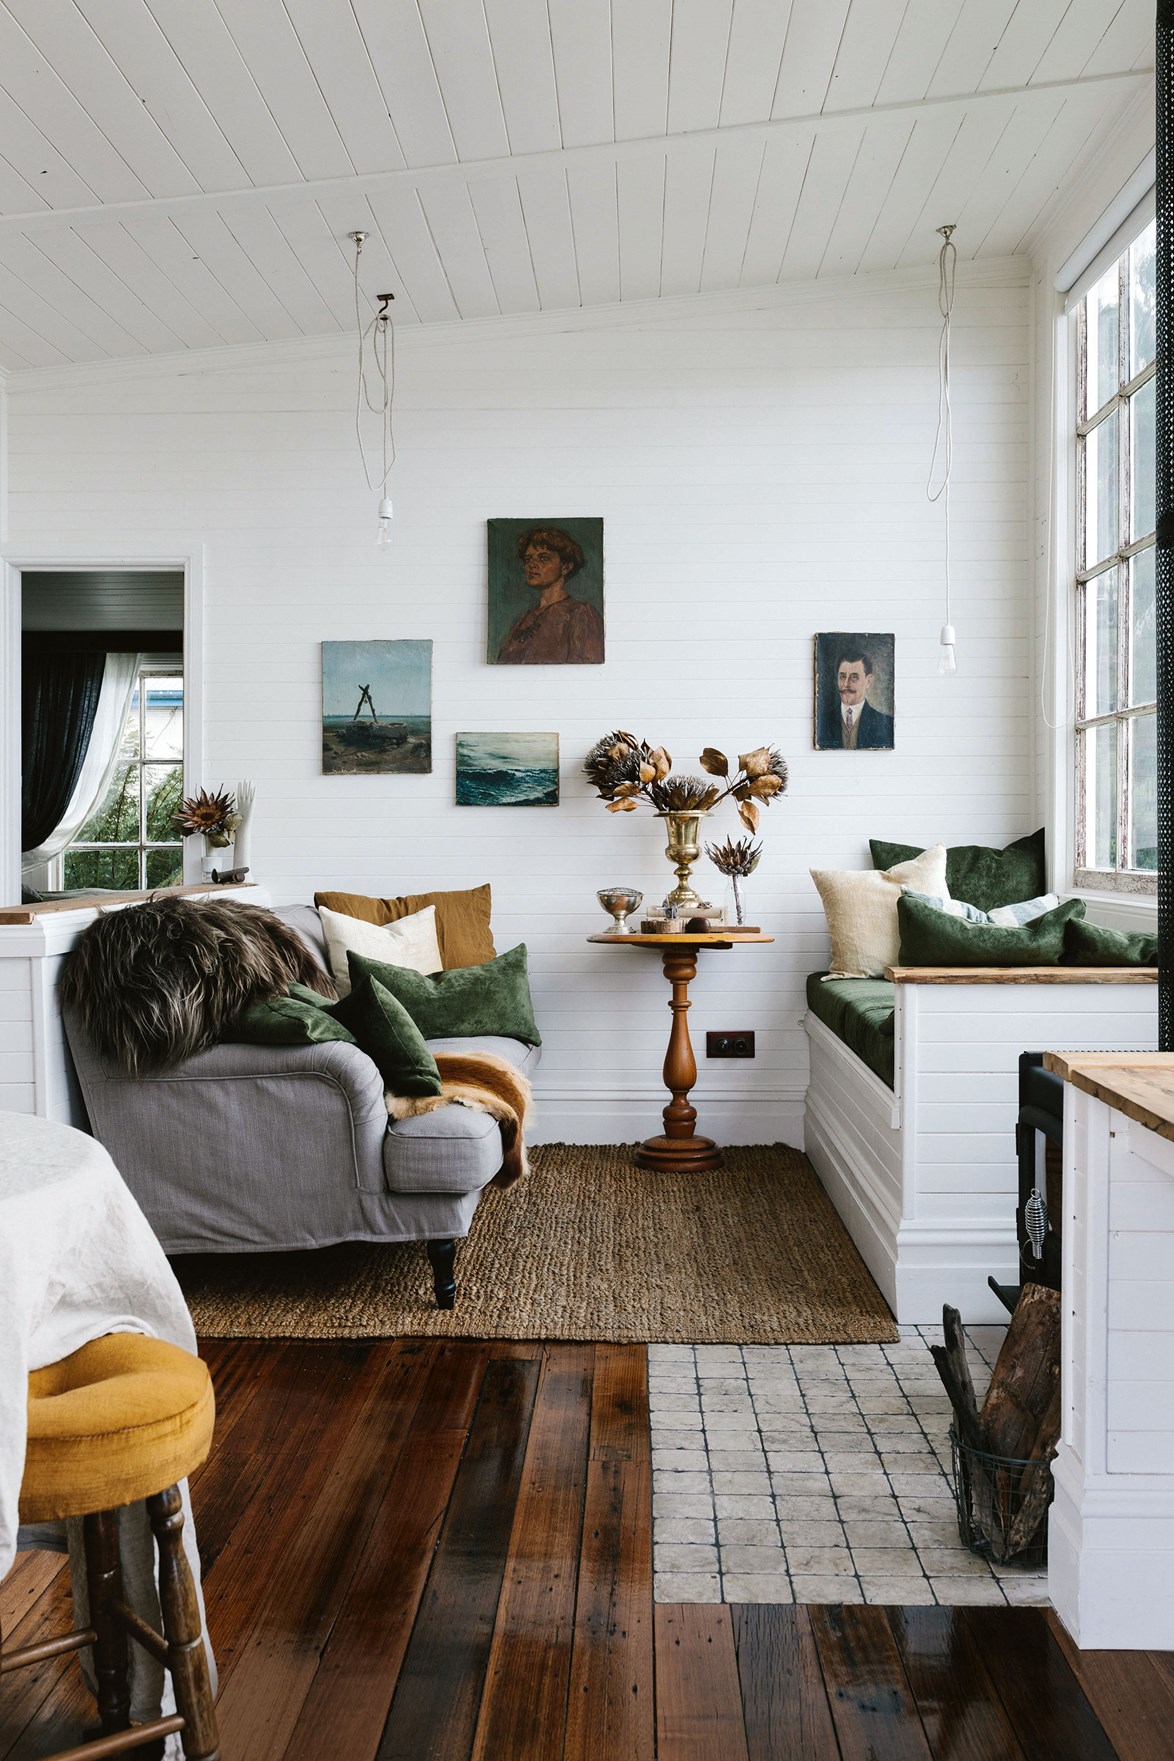 [Captain's Rest](https://www.homestolove.com.au/tasmania-airbnb-captains-rest-13981|target="_blank") is a cosy, one-bedroom Airbnb cottage in Lettes Bay, Strahan, in Tasmania. "I spent six months restoring it and falling in love with the tranquility of Tasmania's west coast," says owner Sarah Andrews. "When it's cold or wet outside, I sit in front of the large windows watching the water and hills with a fire lit in the wood burner."